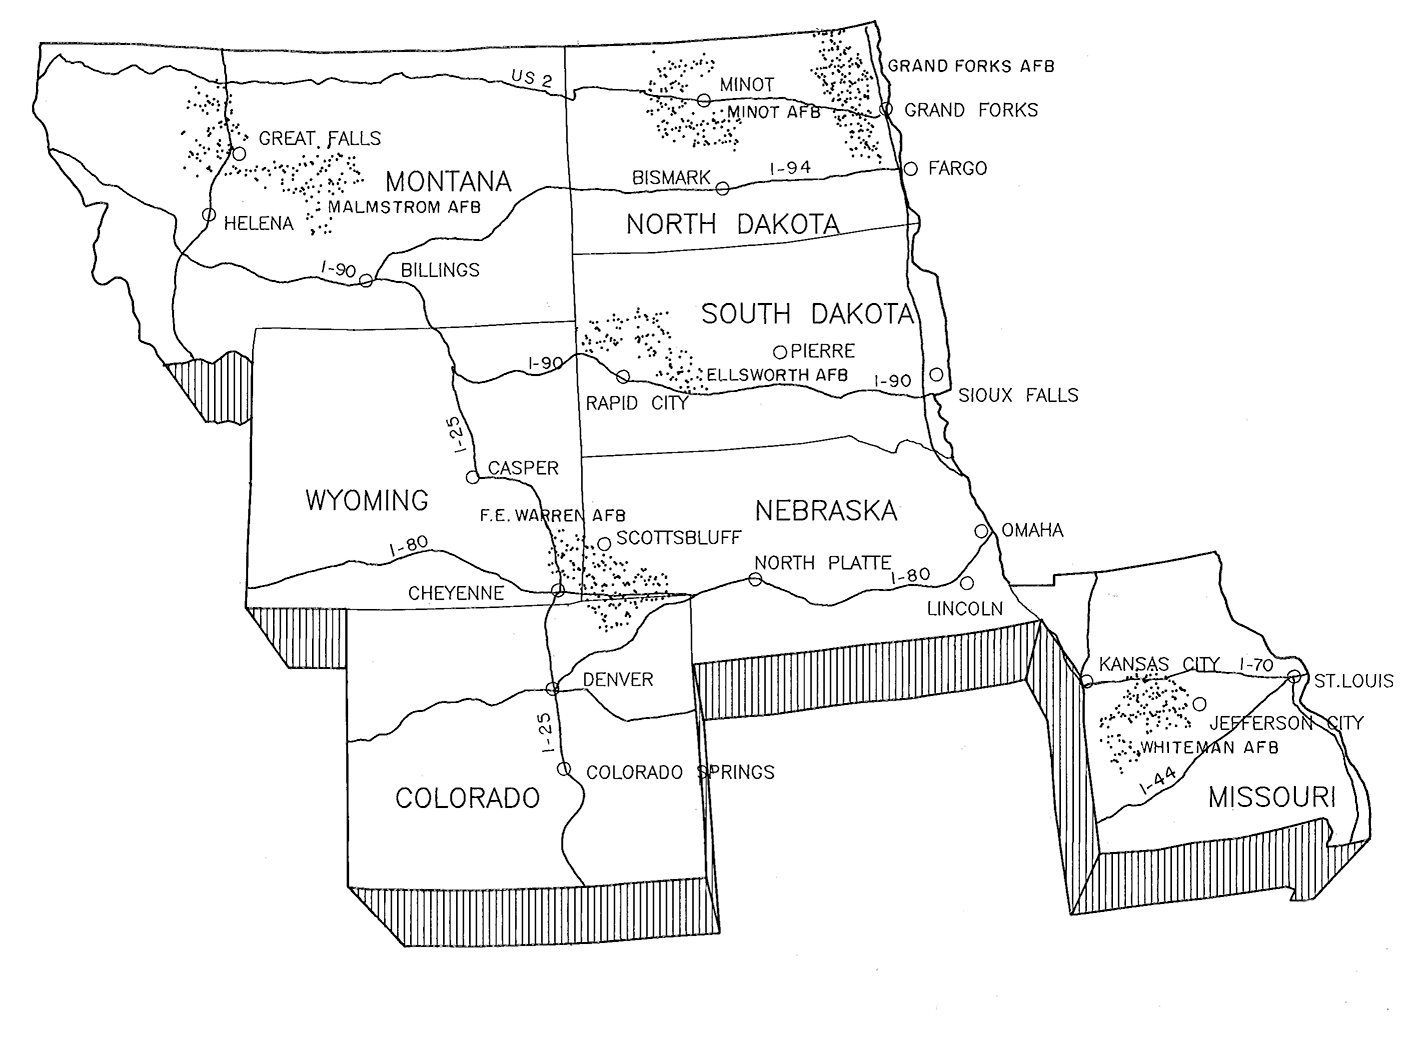 Black and white line drawing of the upper midwest states showing the location of the six missile fields